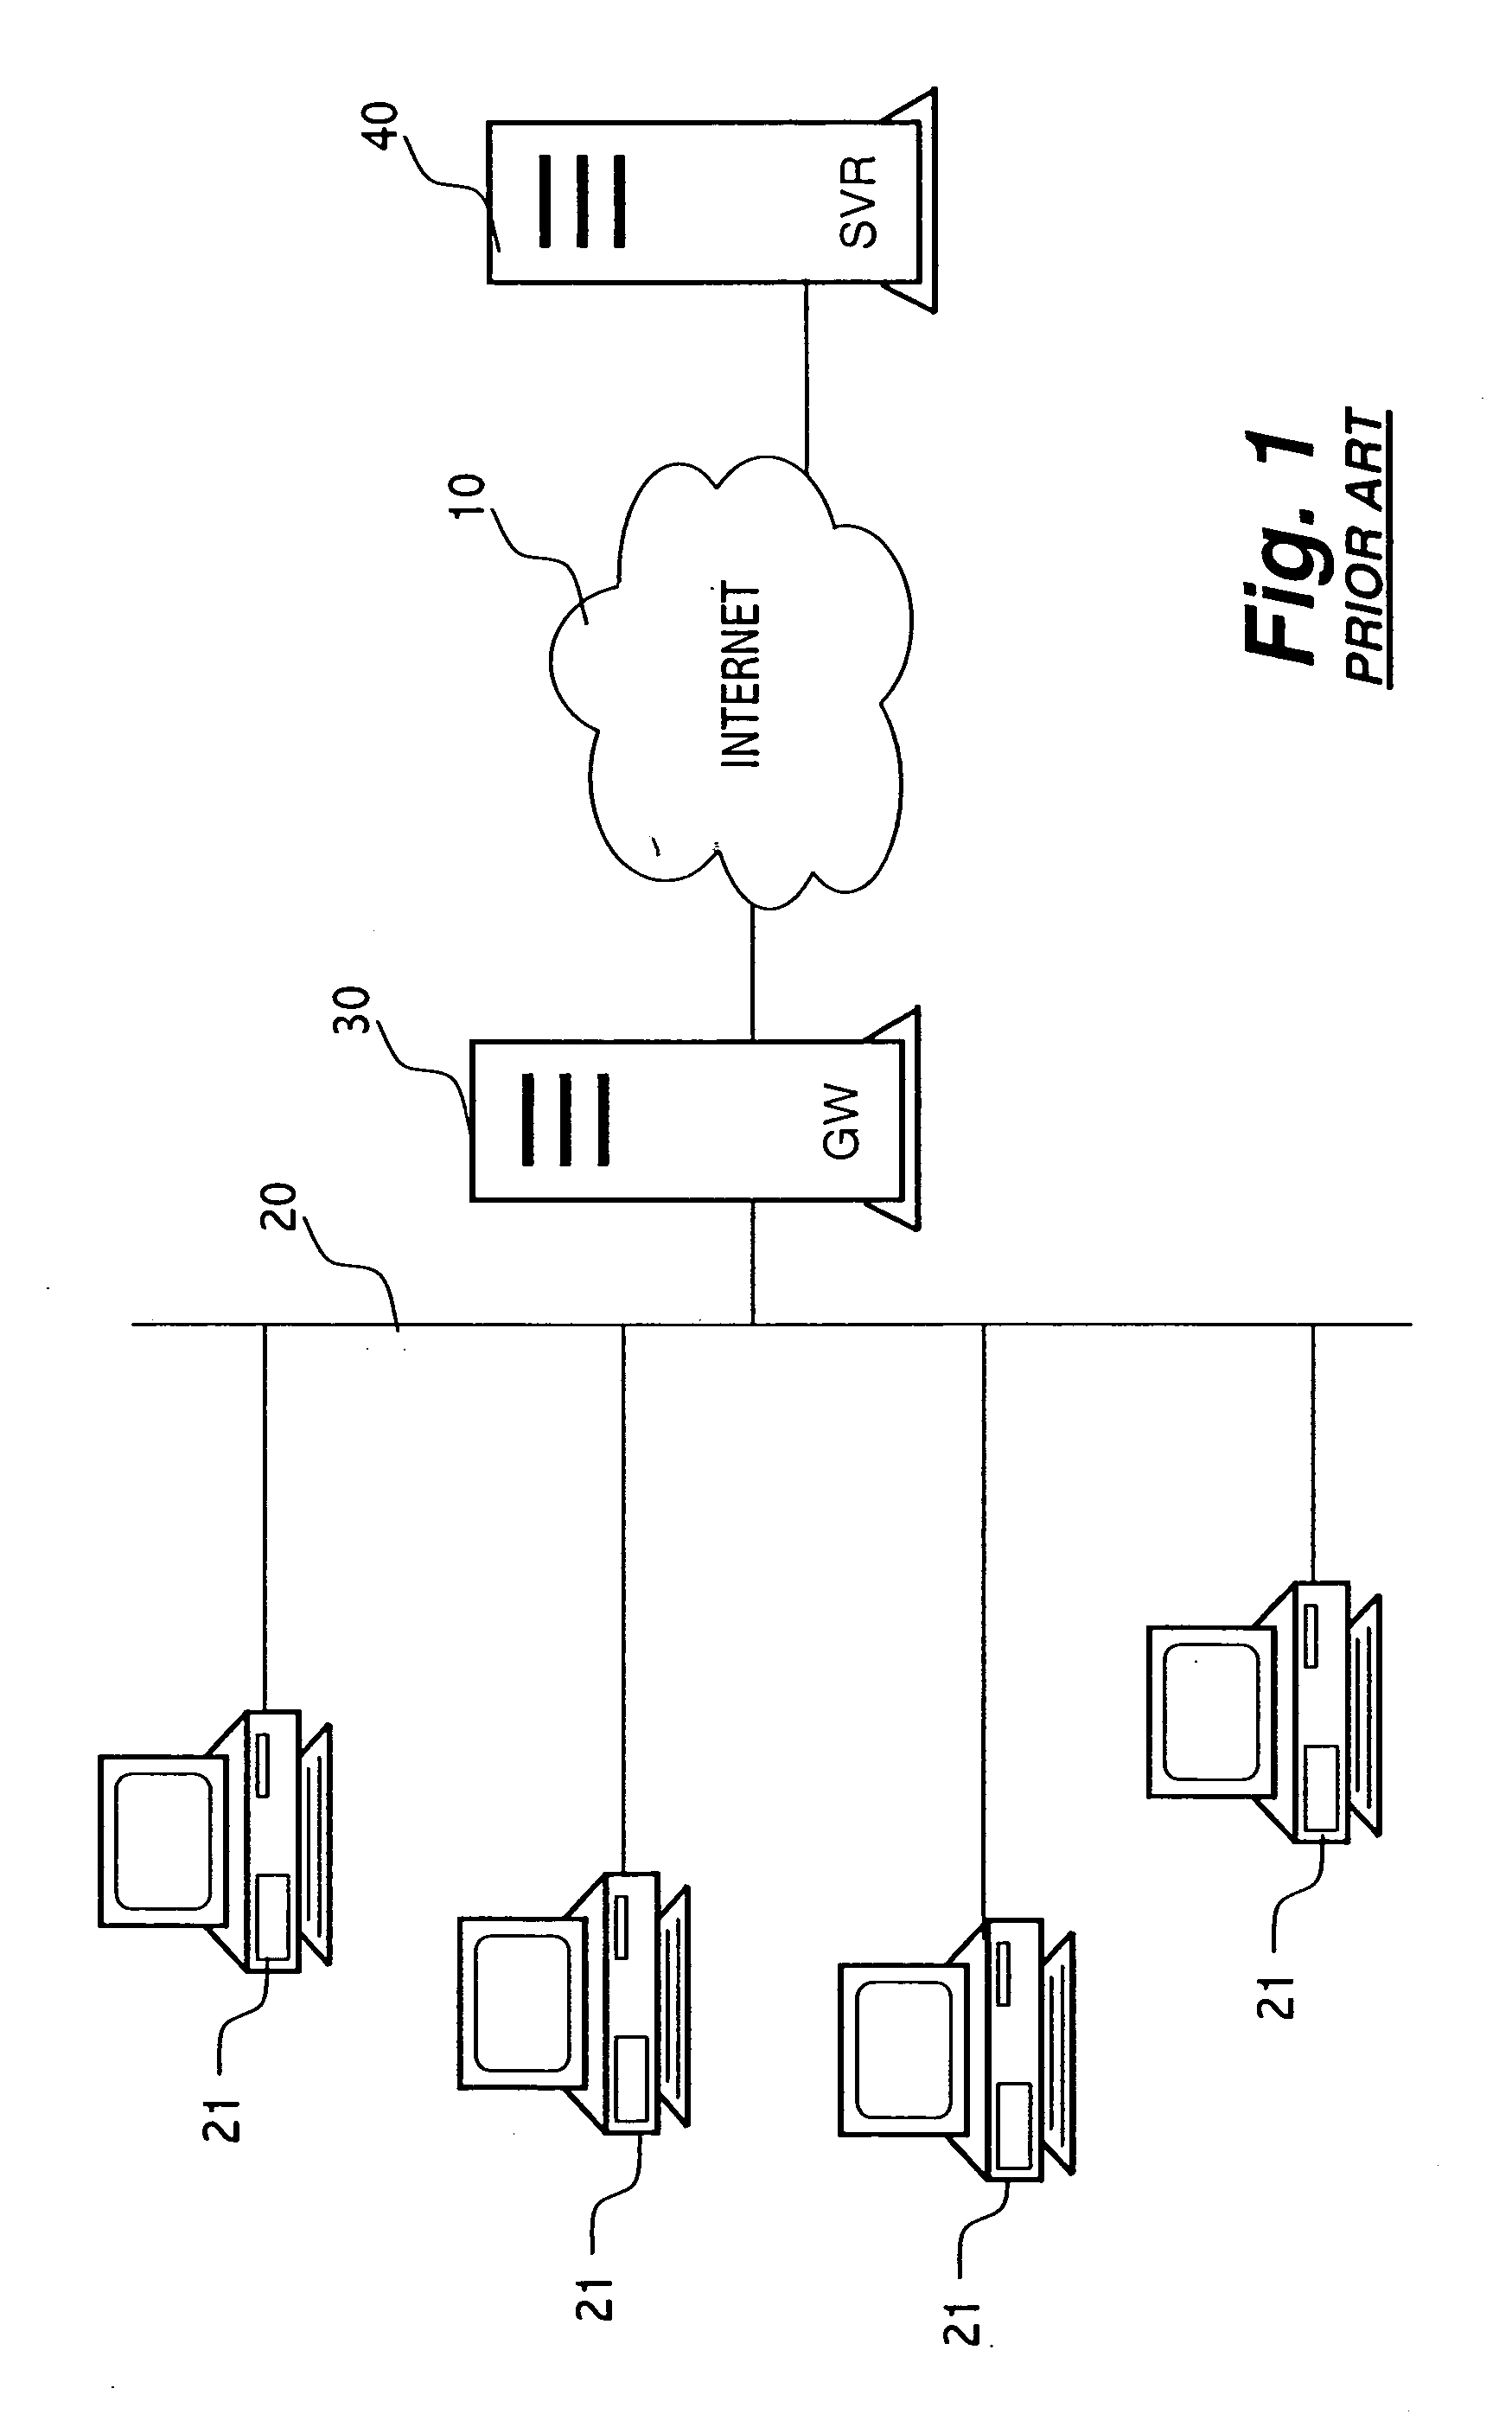 Method for speeding up the pass time of an executable through a checkpoint